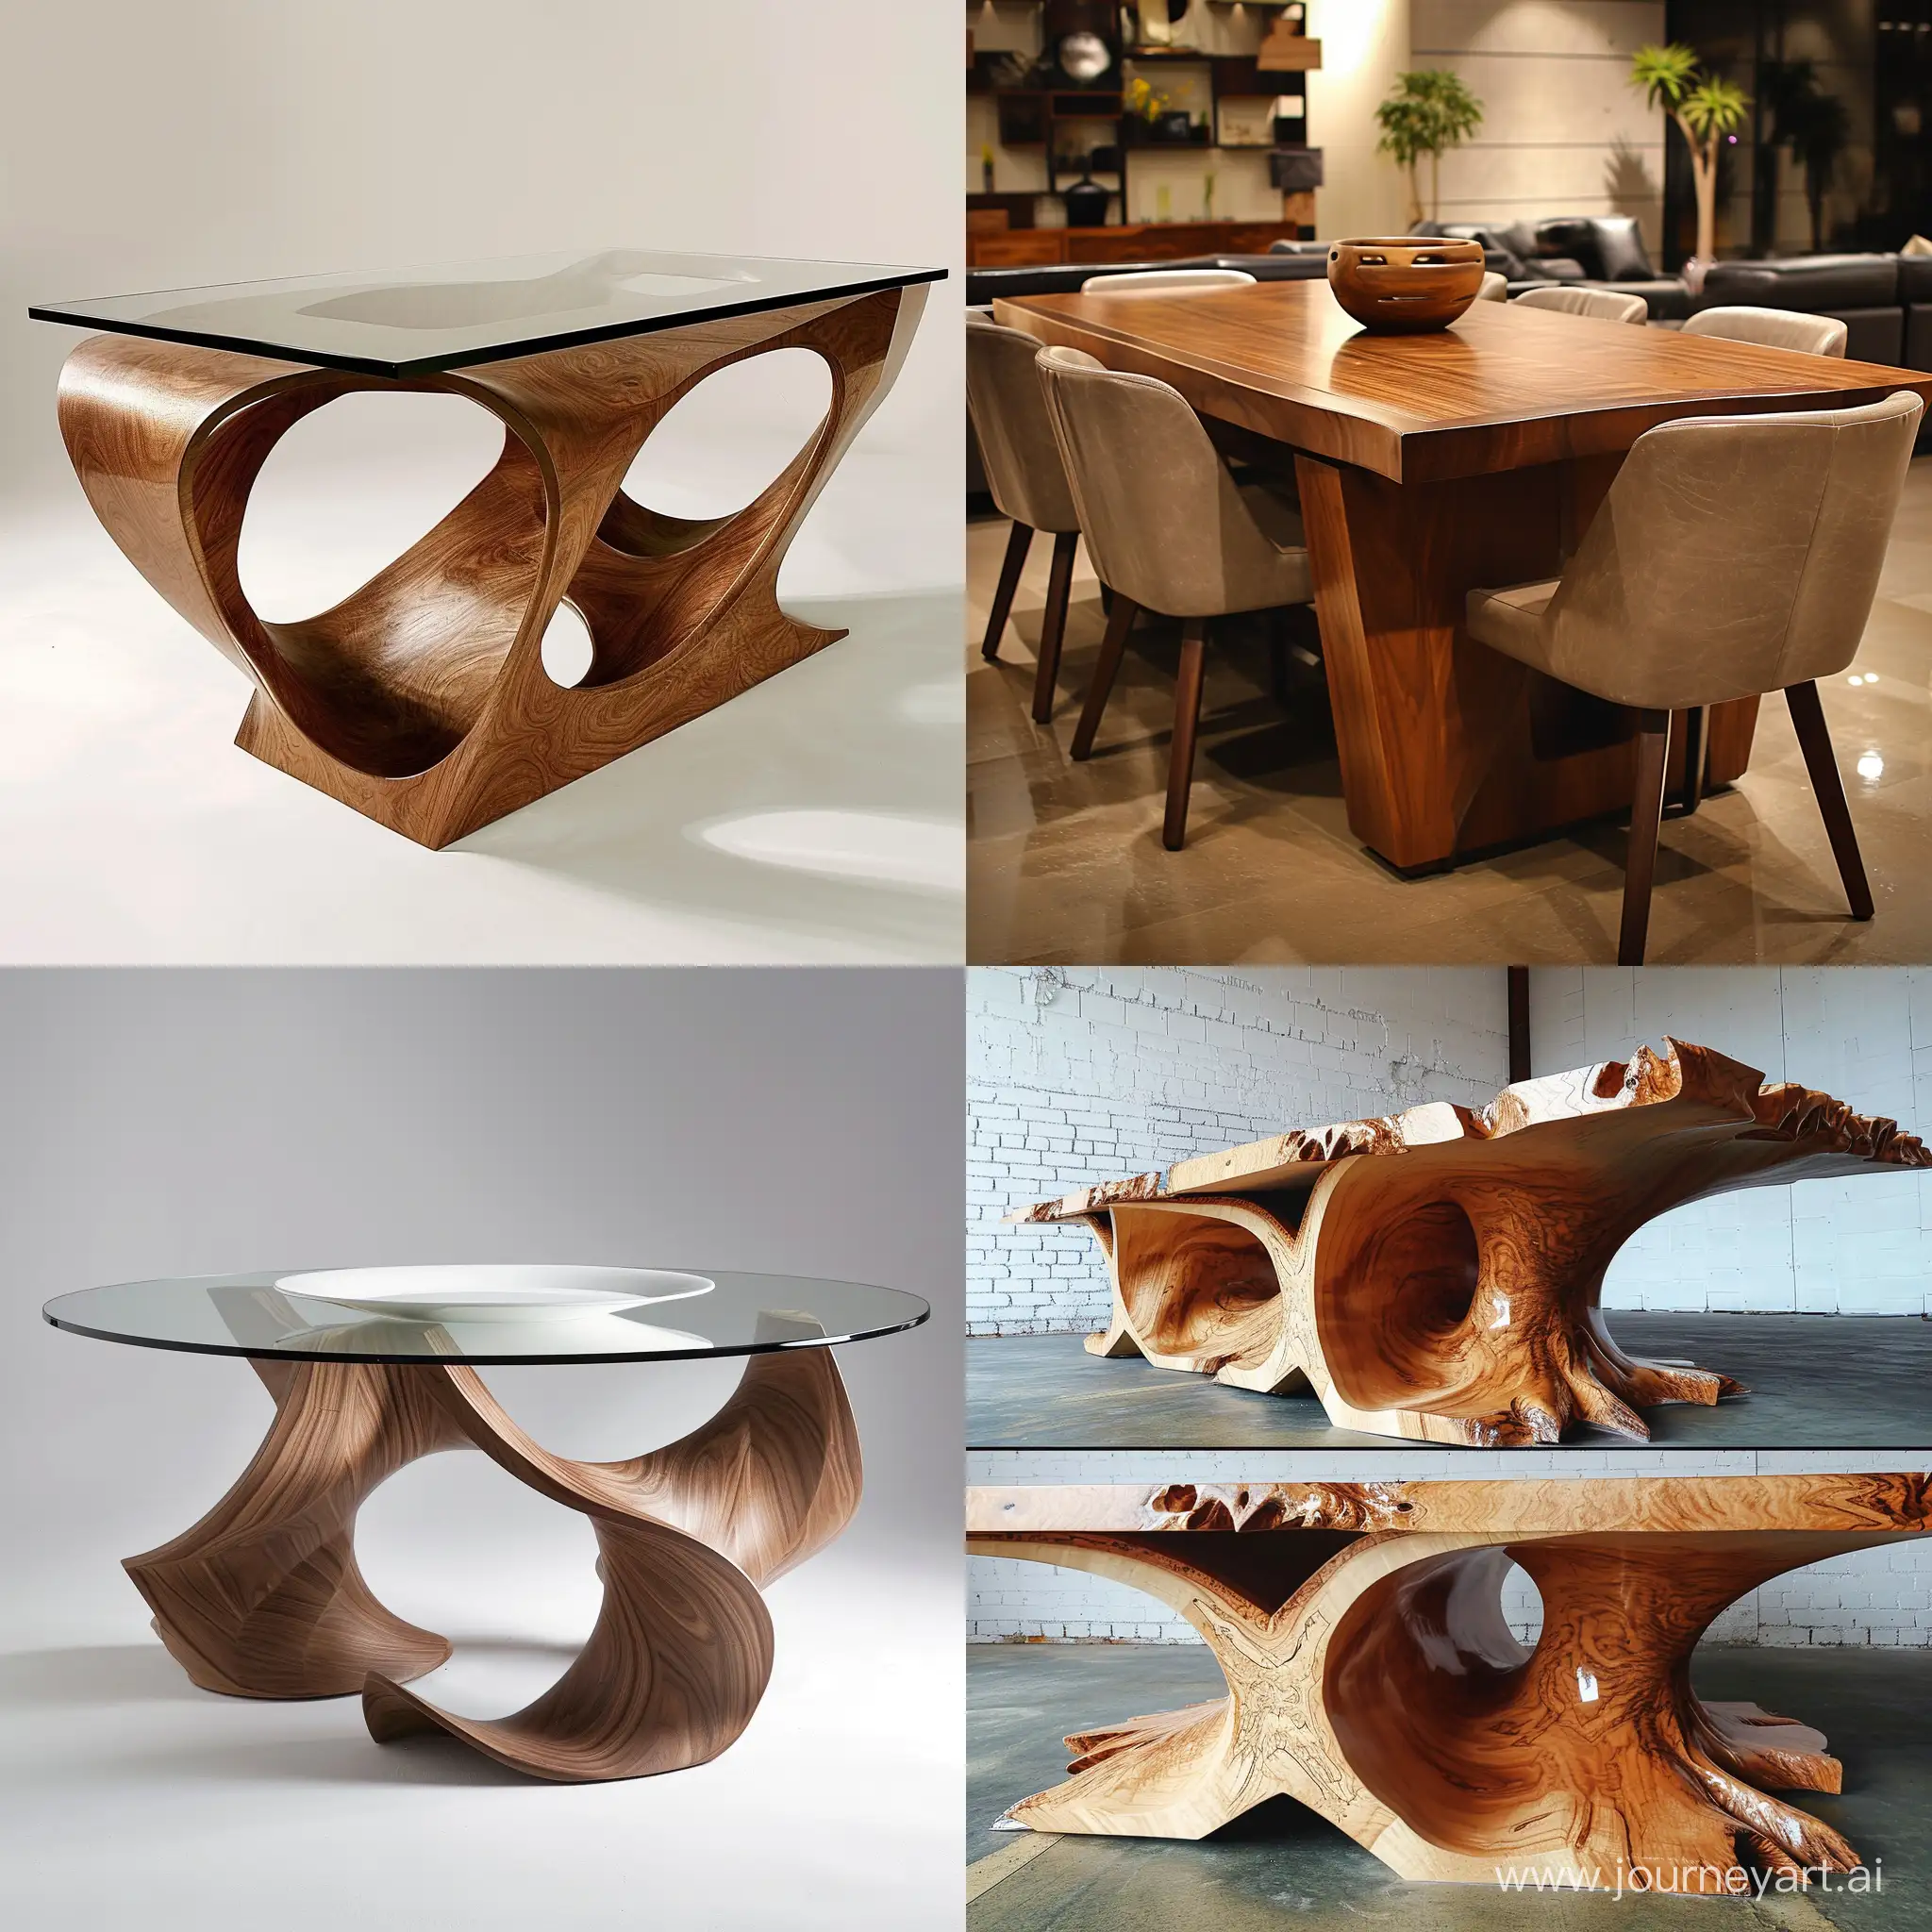 Modern-Furniture-Dinner-Table-Design-with-6-Seats-and-11-Aspect-Ratio